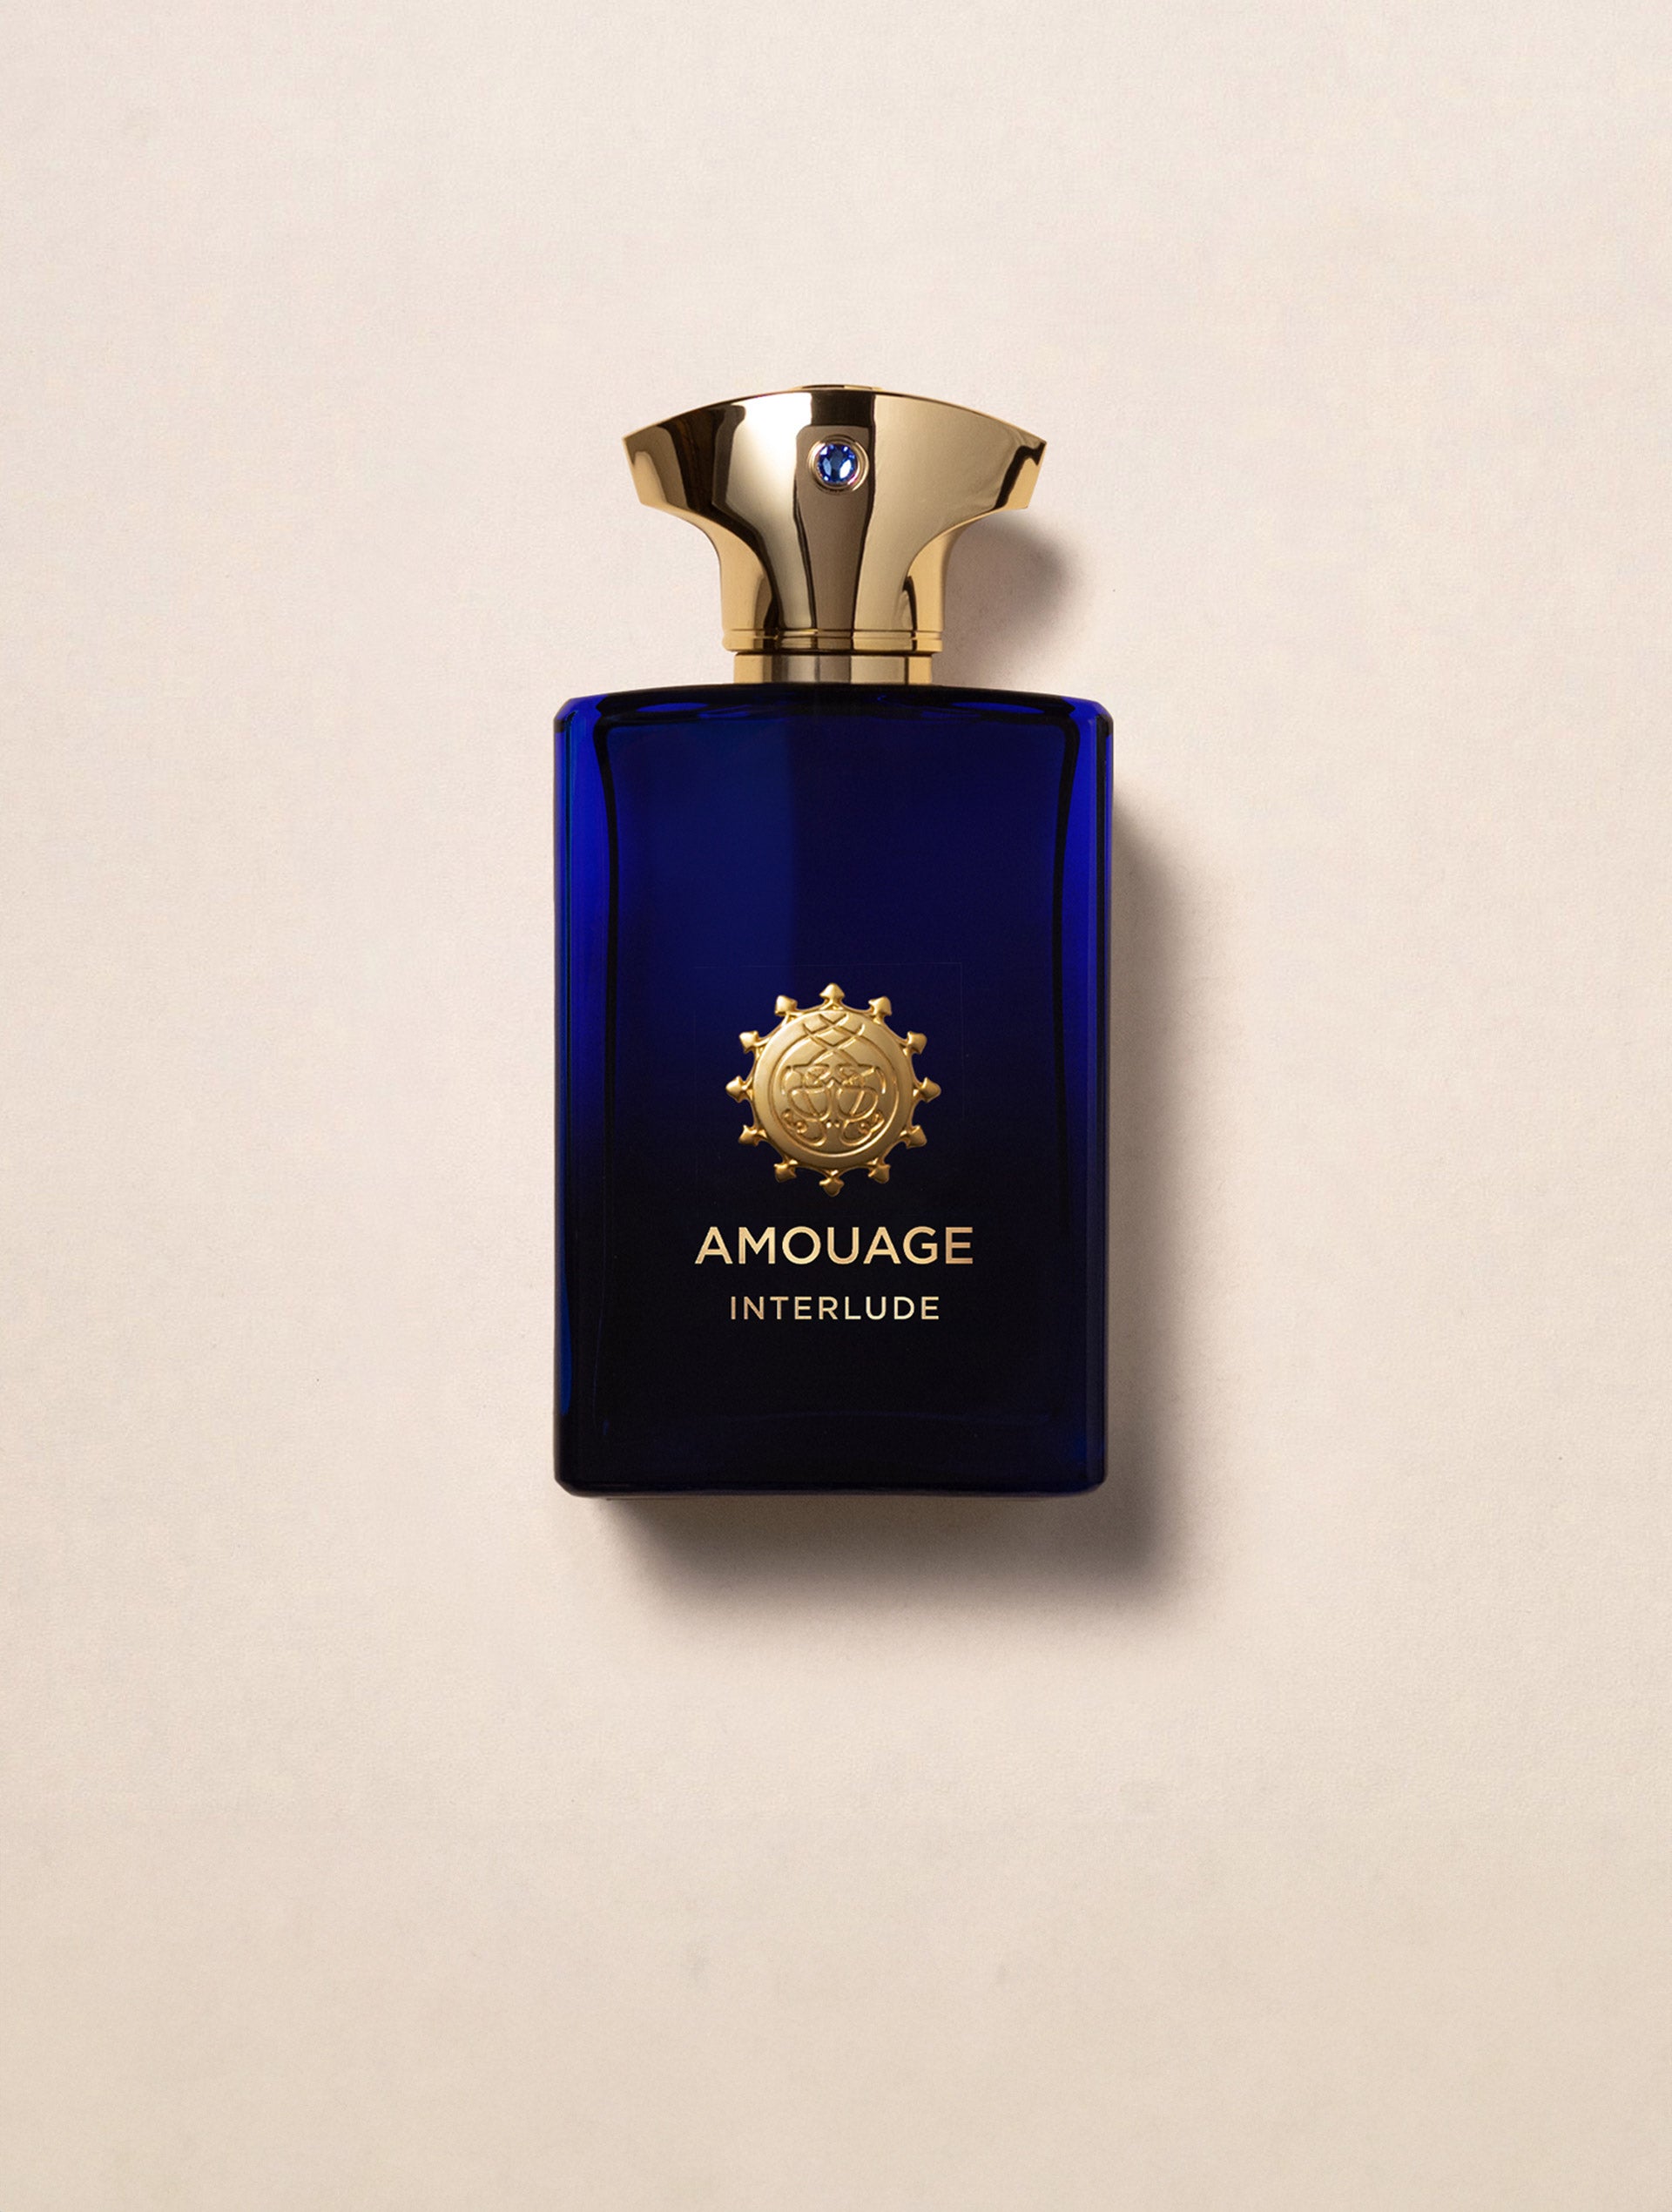 The House of Amouage